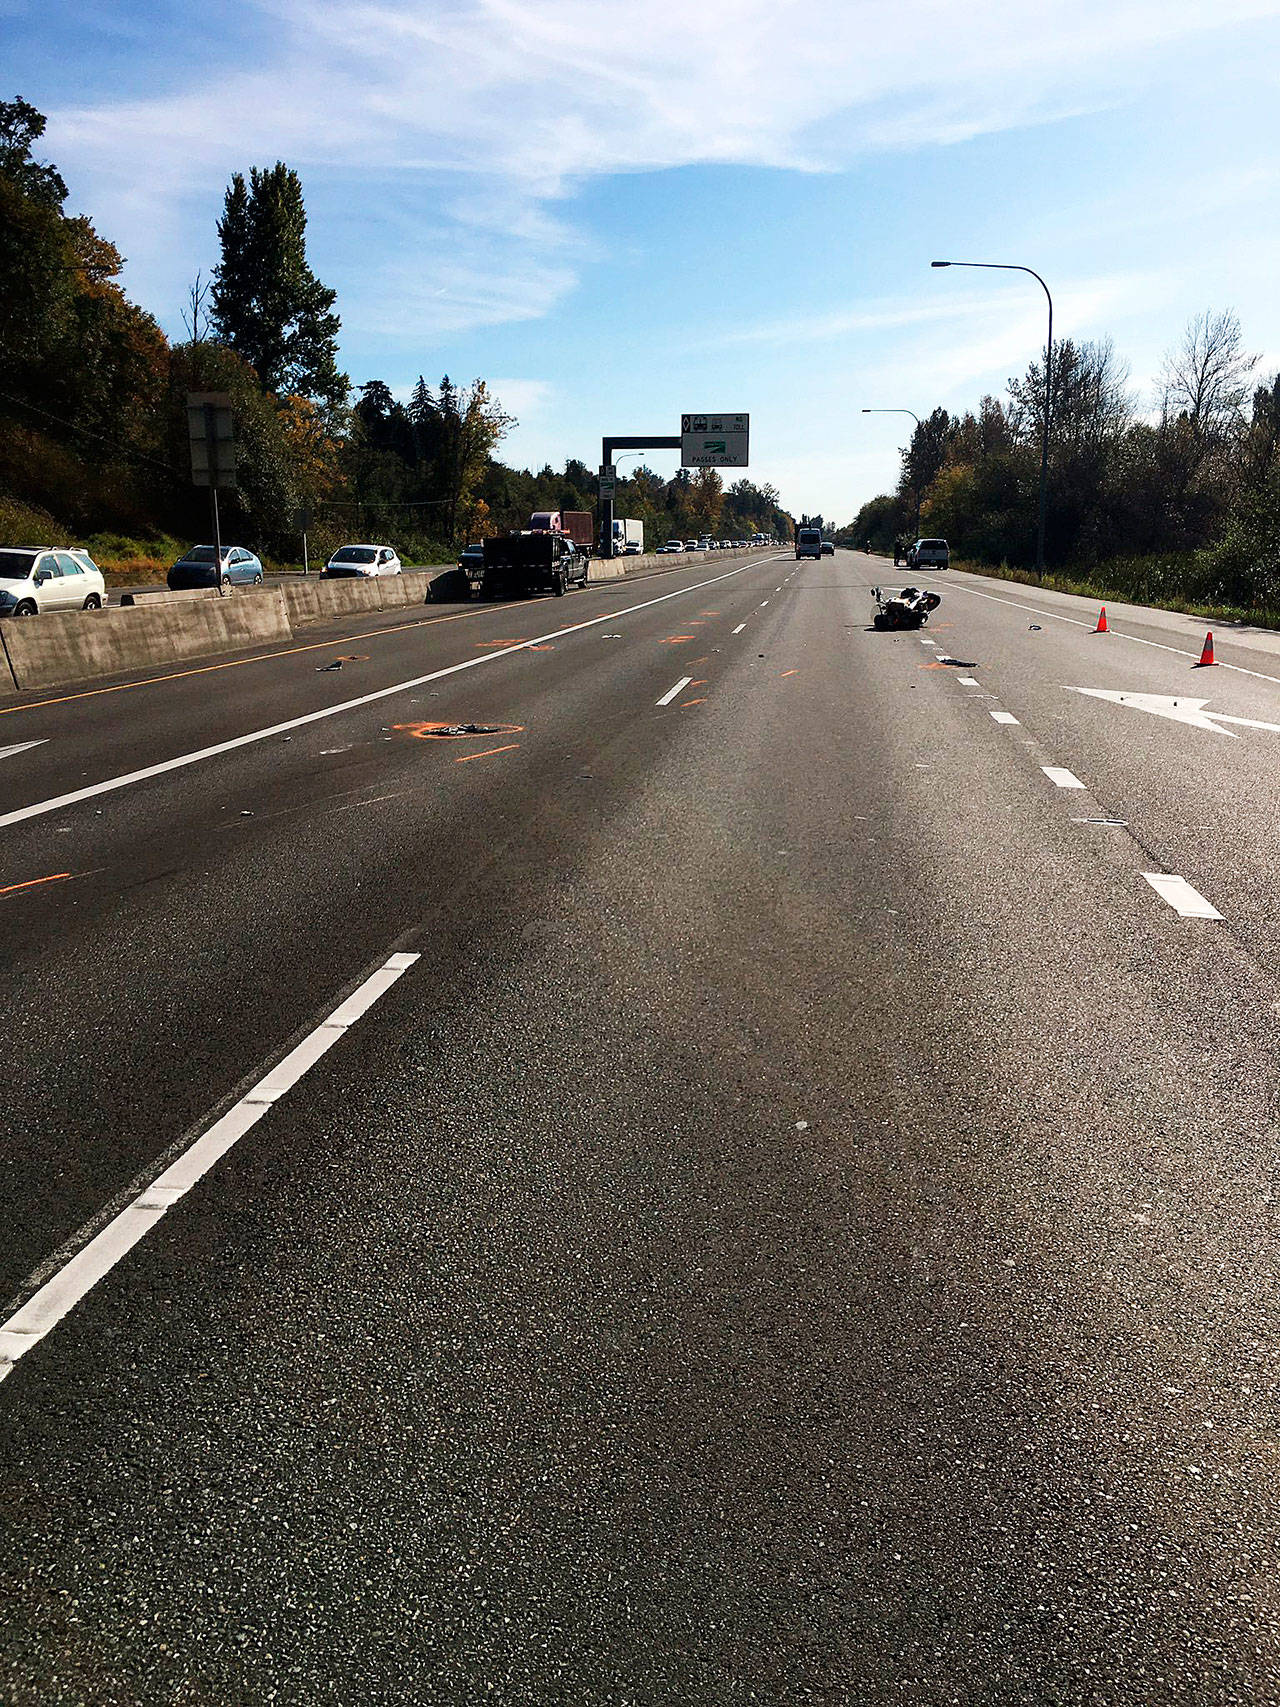 A fatal motorcycle crash on Friday afternoon caused the closure of all southbound lanes of Highway 167 near the South 180th Street exit. COURTESY PHOTO, State Patrol